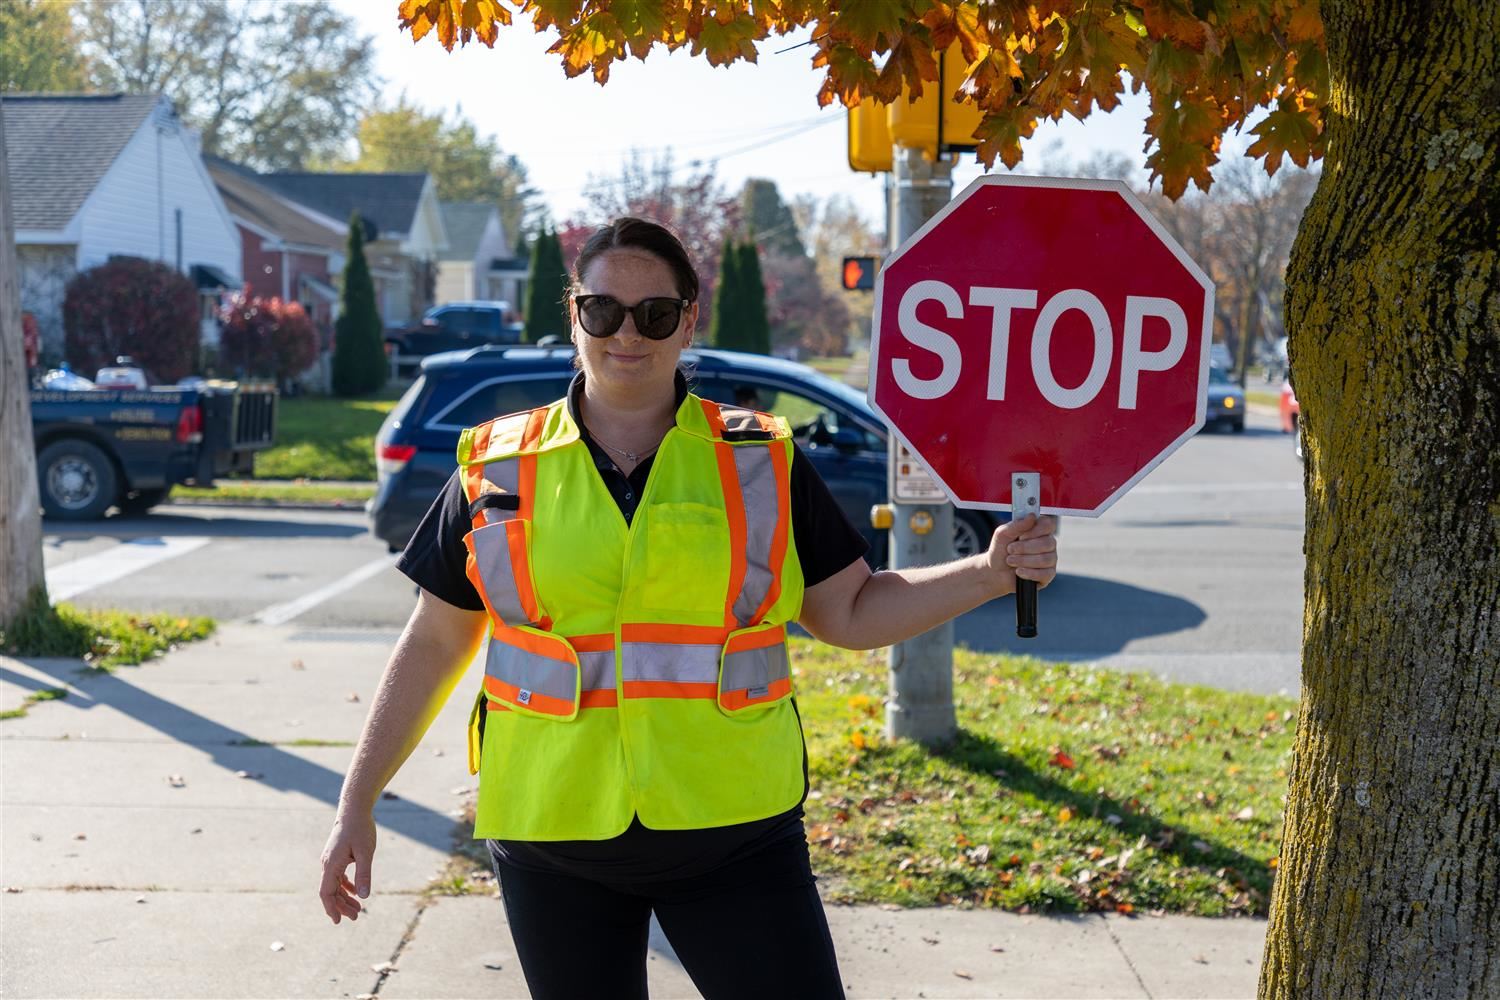 Photo of  a female crossing guard wearing a florescent yellow reflective safety best and holding a "STOP" sign.